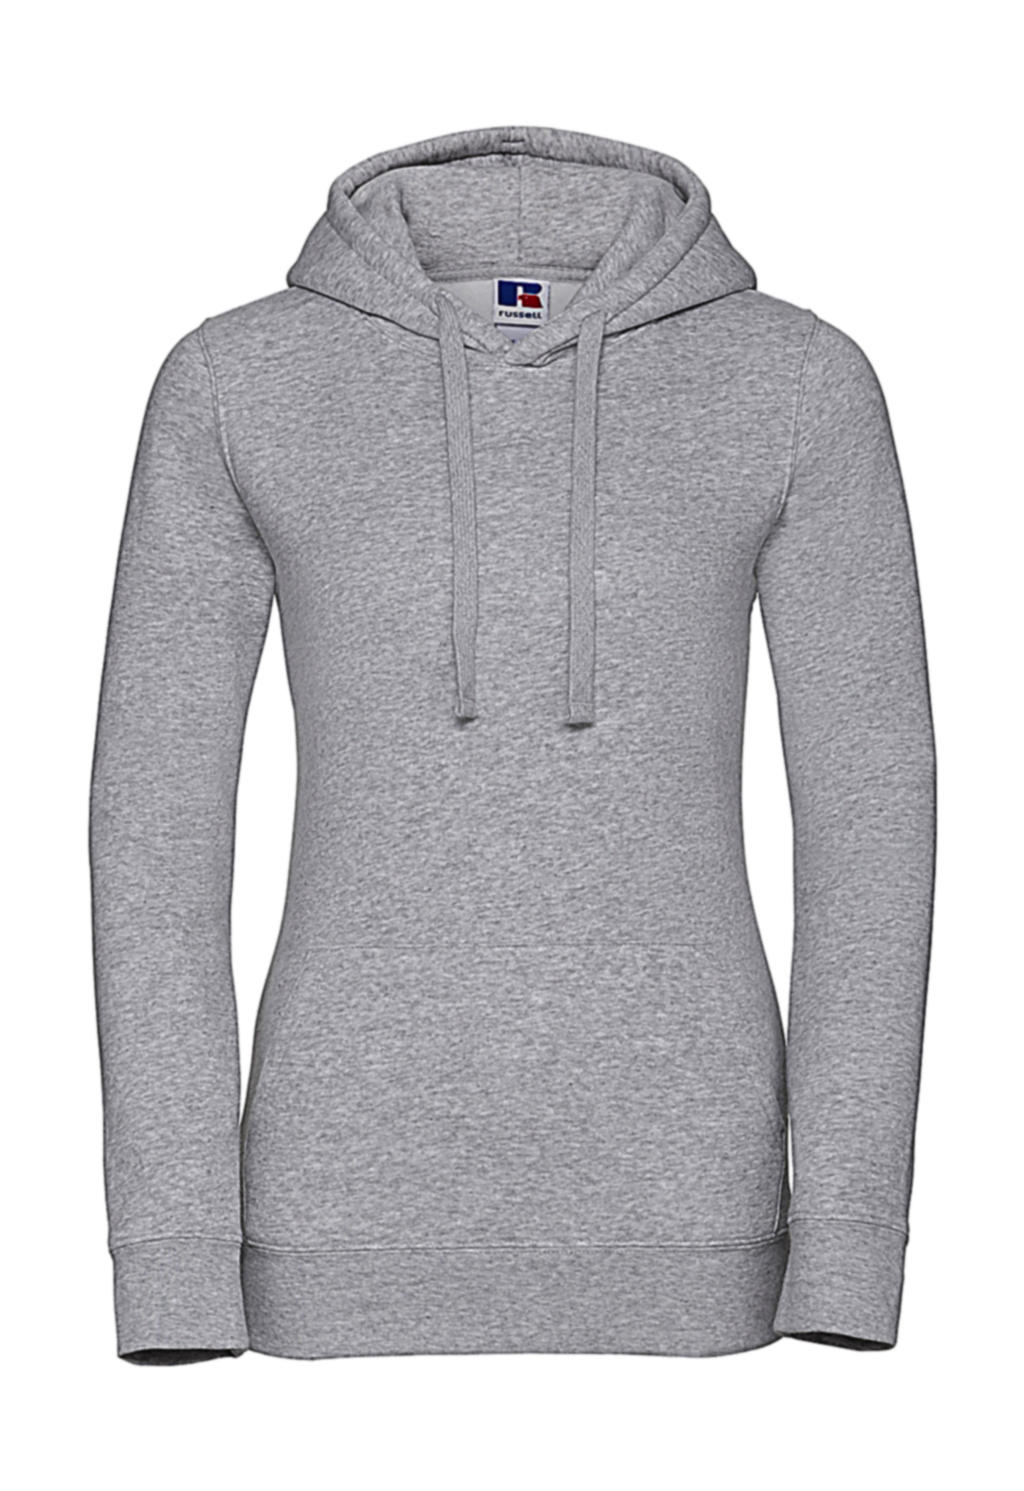  Ladies Authentic Hooded Sweat in Farbe Light Oxford